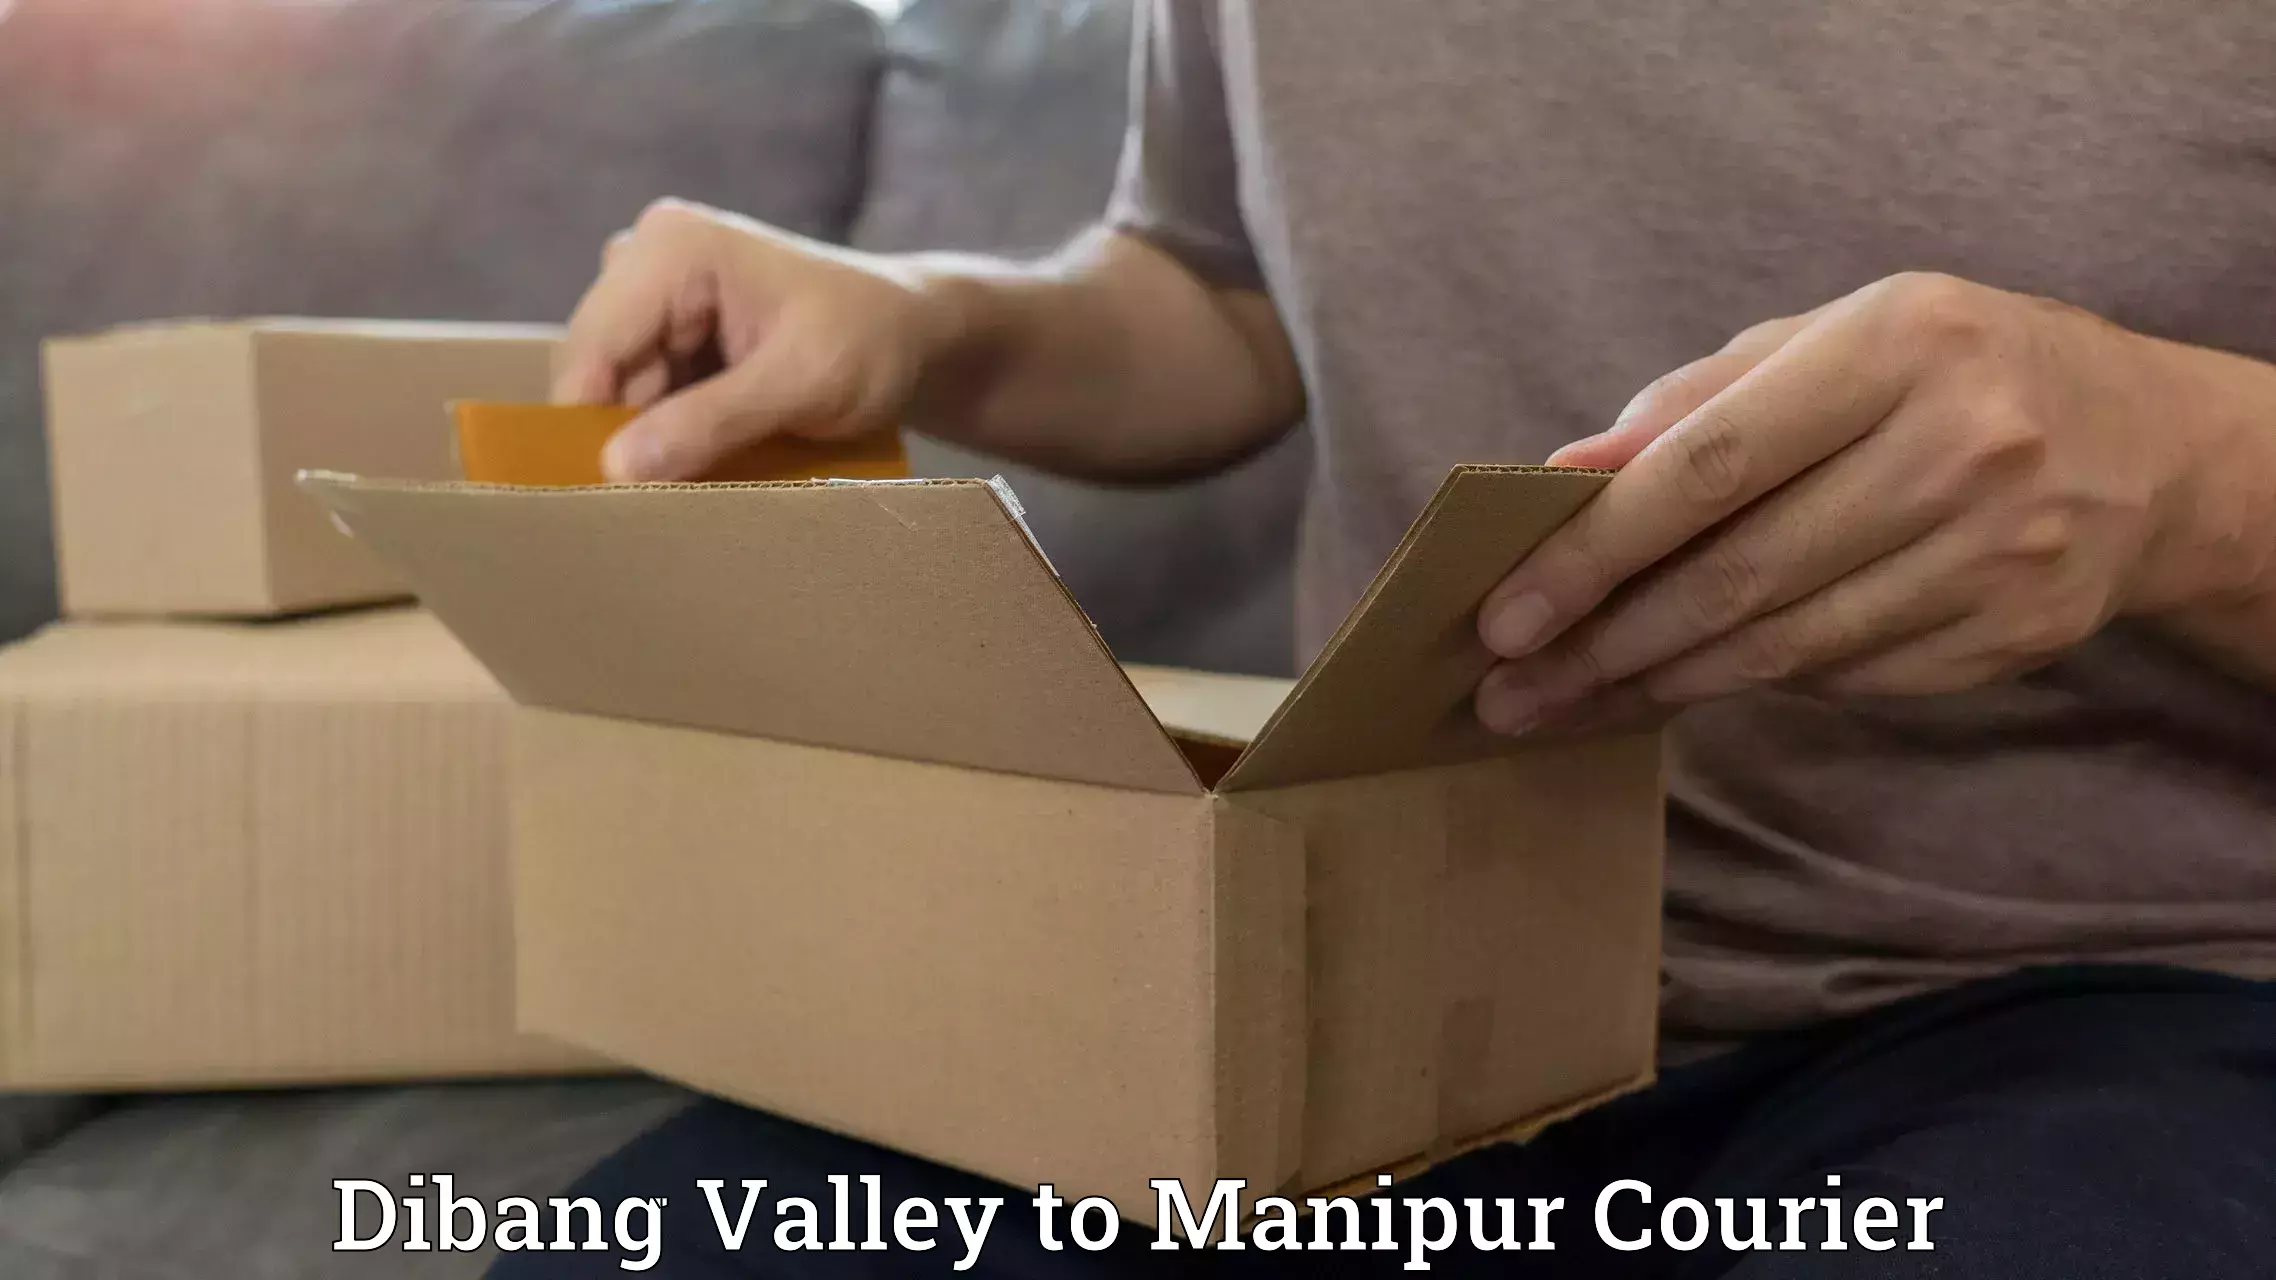 Courier service partnerships Dibang Valley to Manipur